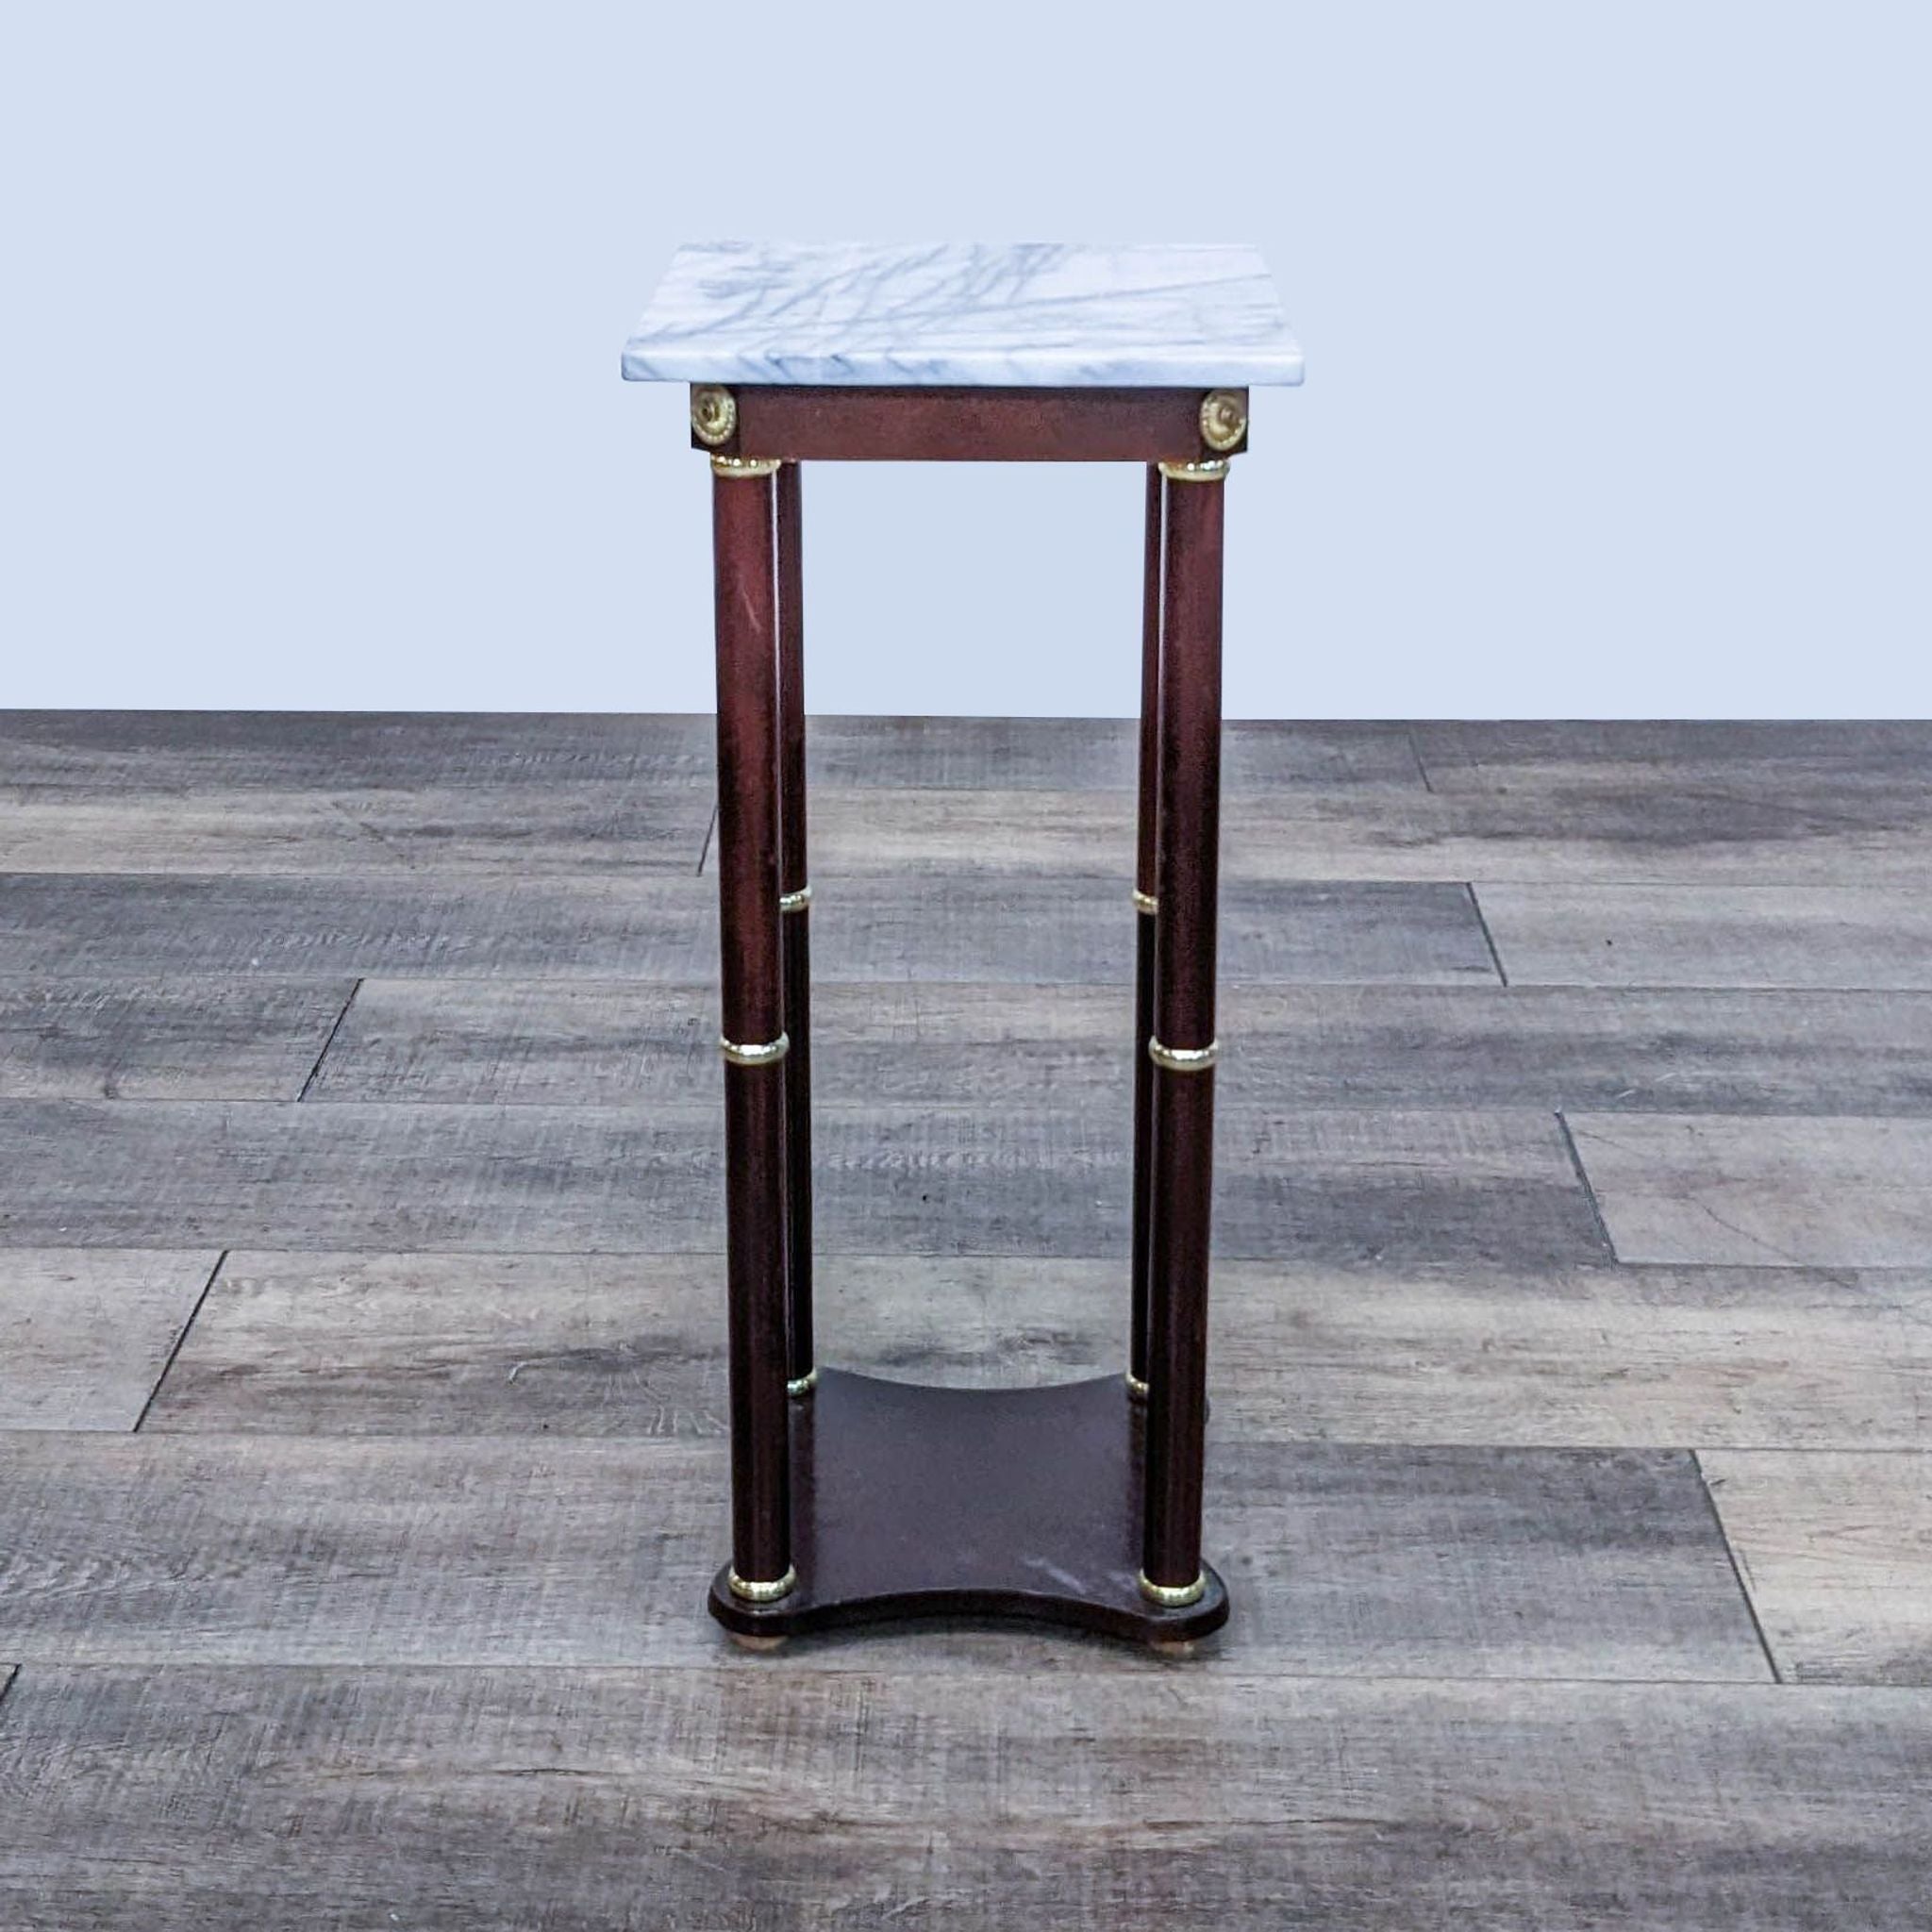 Reperch end table with marble top and wooden legs featuring brass embellishments on a wooden floor.